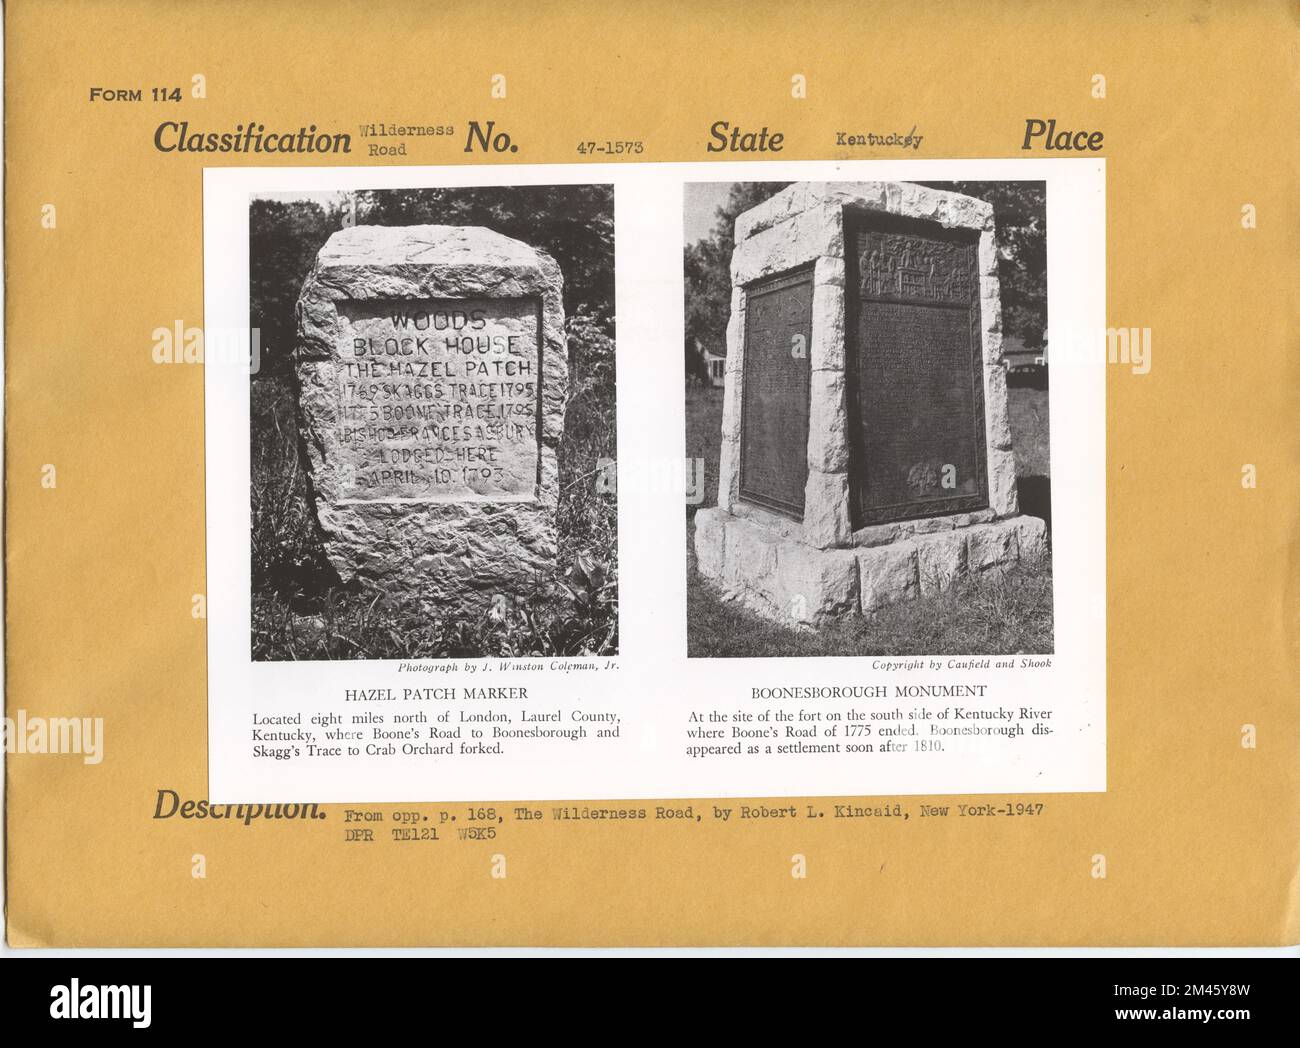 Hazel Patch Marker, Boonesborough Monument. Original caption: From opp. p. 168, The Wilderness Road, by Robert L. Kincaid, New York, 1947. Stock Photo